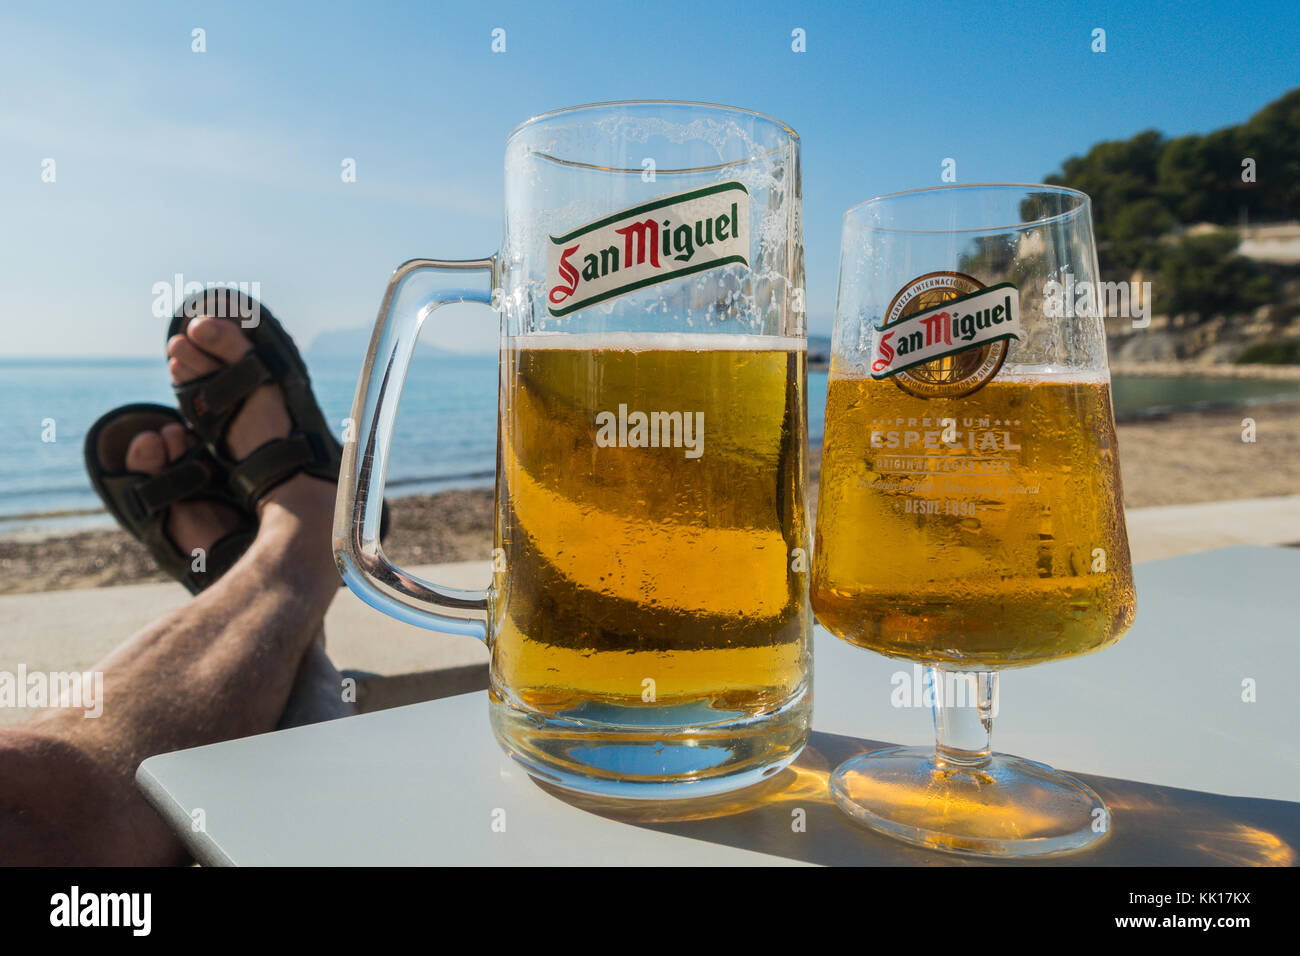 Alamy photography - spanish images lager stock hi-res miguel and San